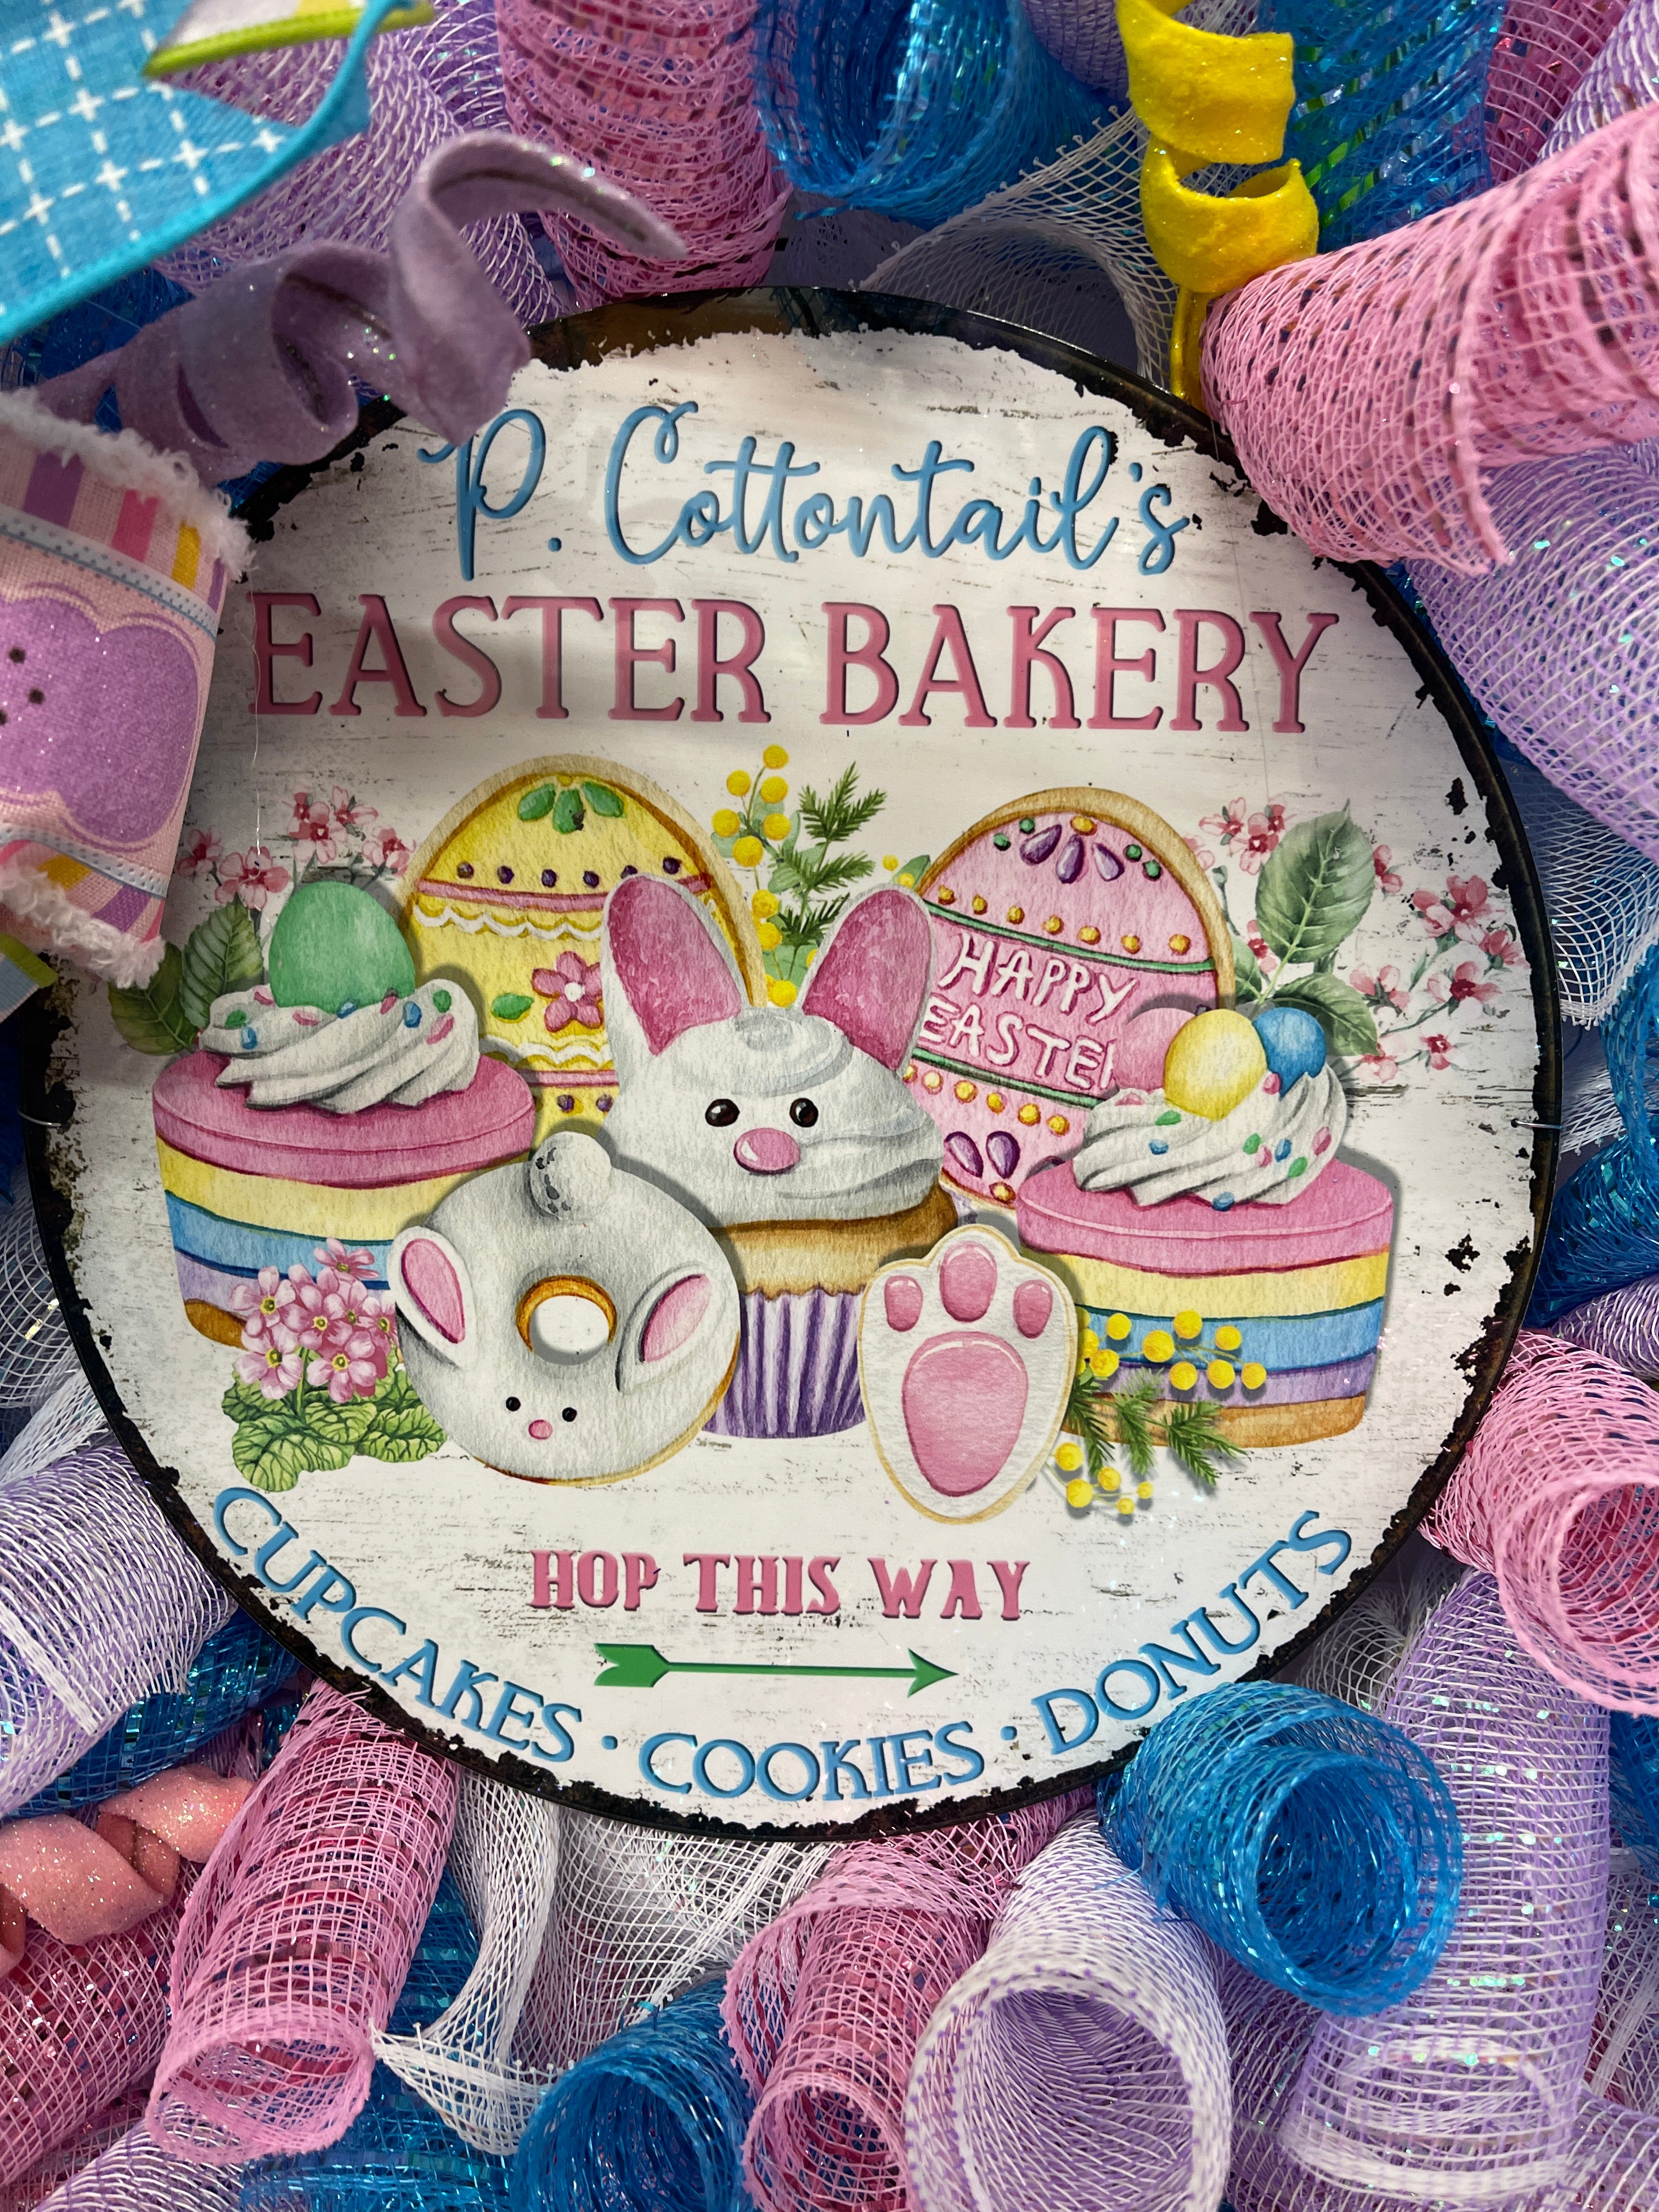 Close Up on P. Cottontails' Easter Bakery Sign, featuring Hop This Way arrow, Cupcakes, Cookies and Donuts